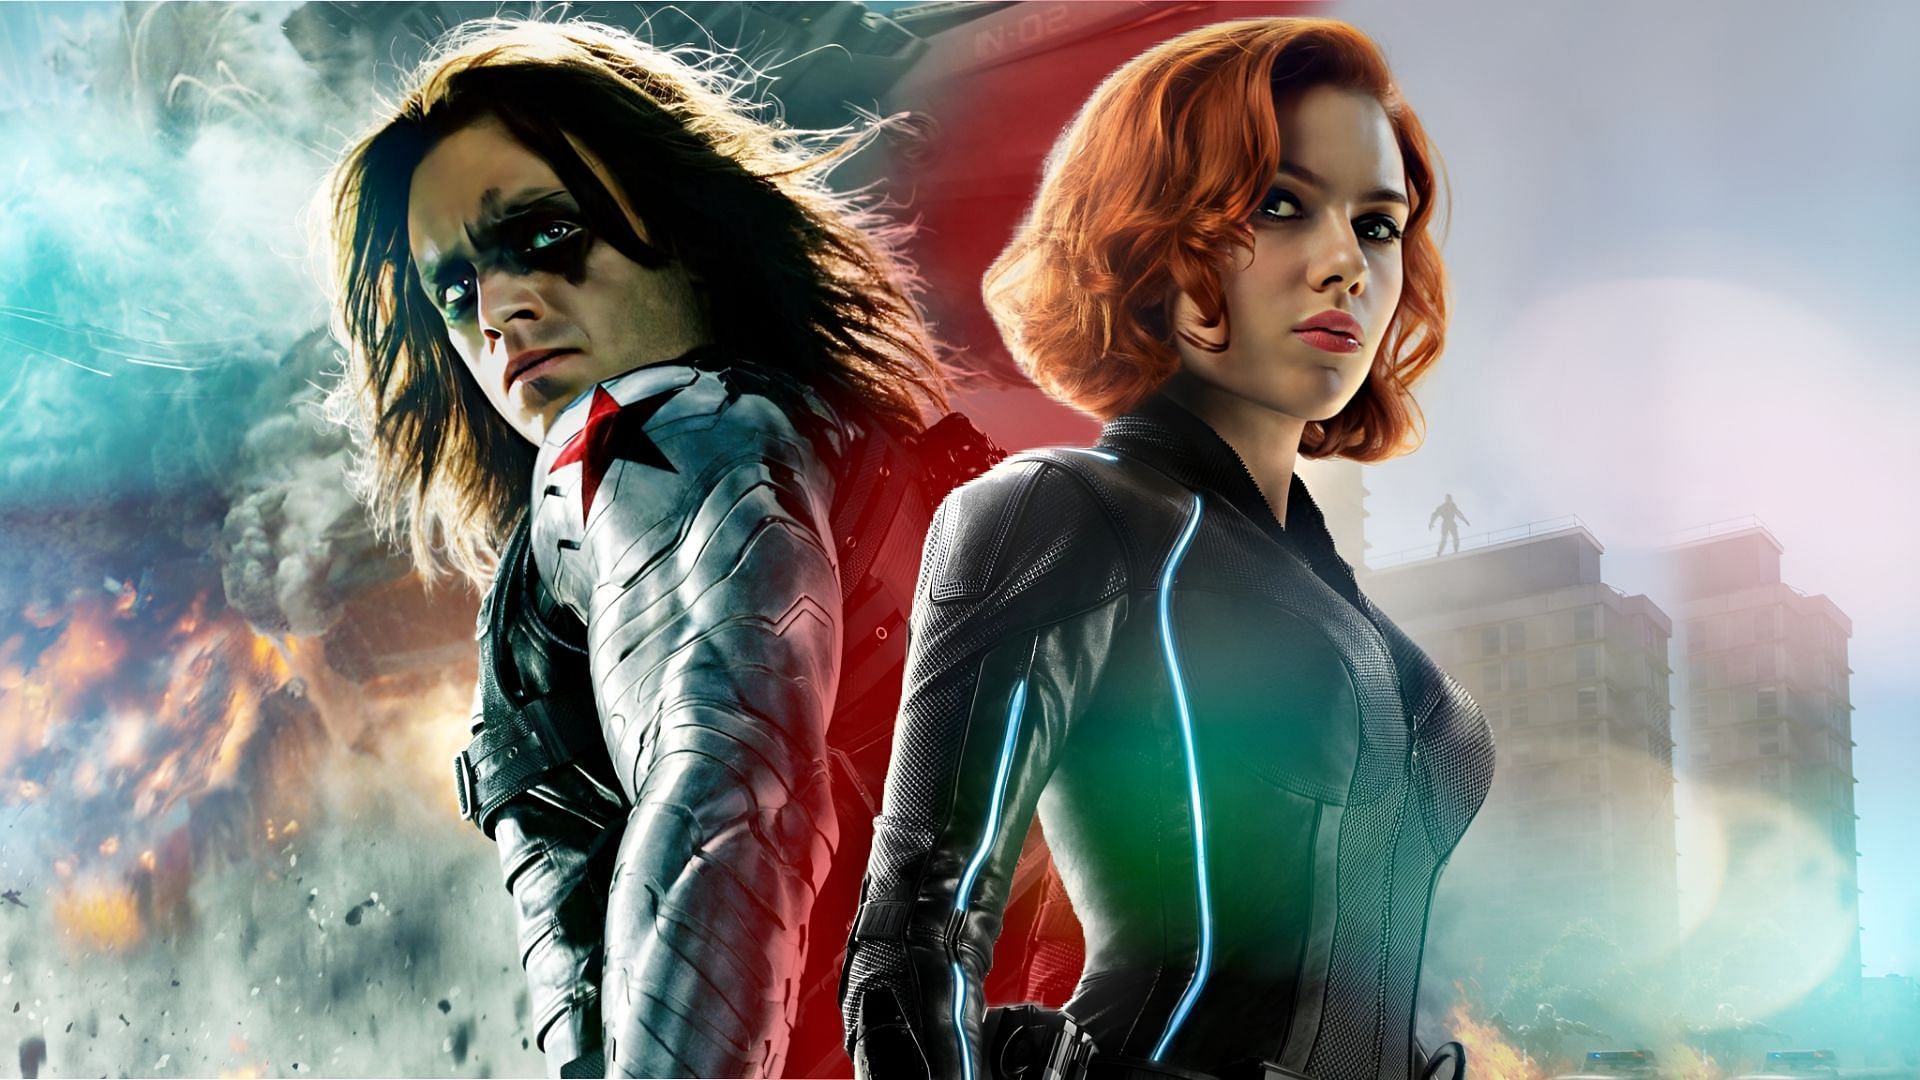 Natasha Romanoff, also known as Black Widow, has captivated fans of the Marvel Cinematic Universe (MCU) since her introduction.(Image Via Sportskeeda)